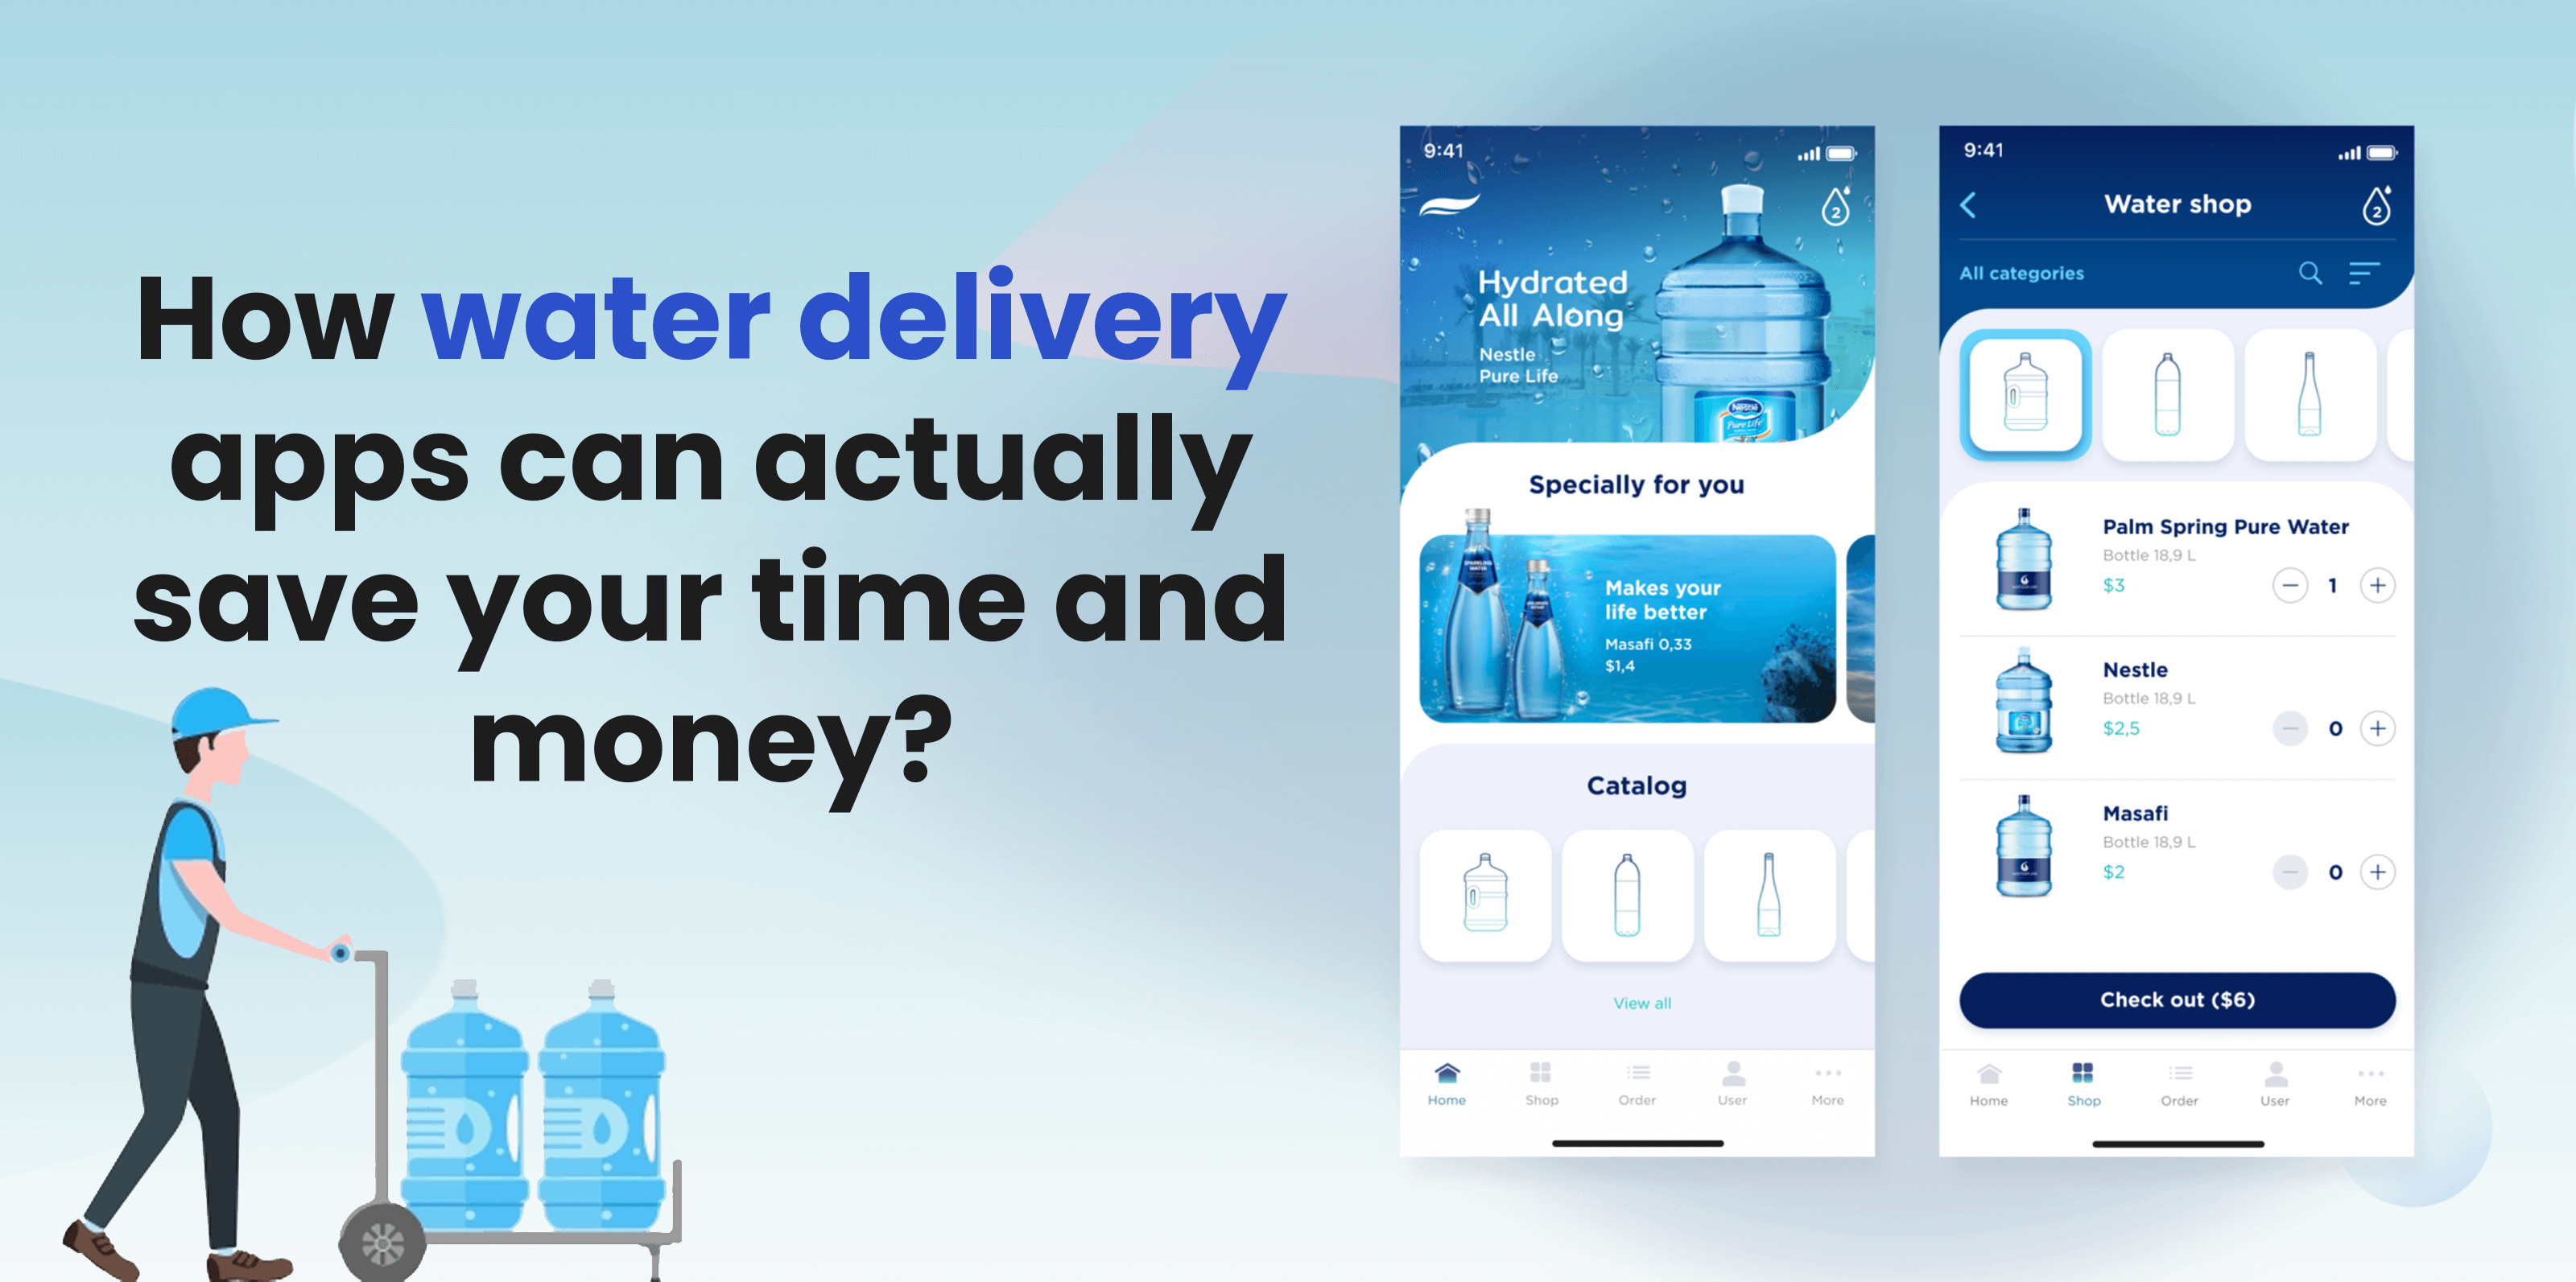 How-water-delivery-apps-can-actually-save-your-time-and-money